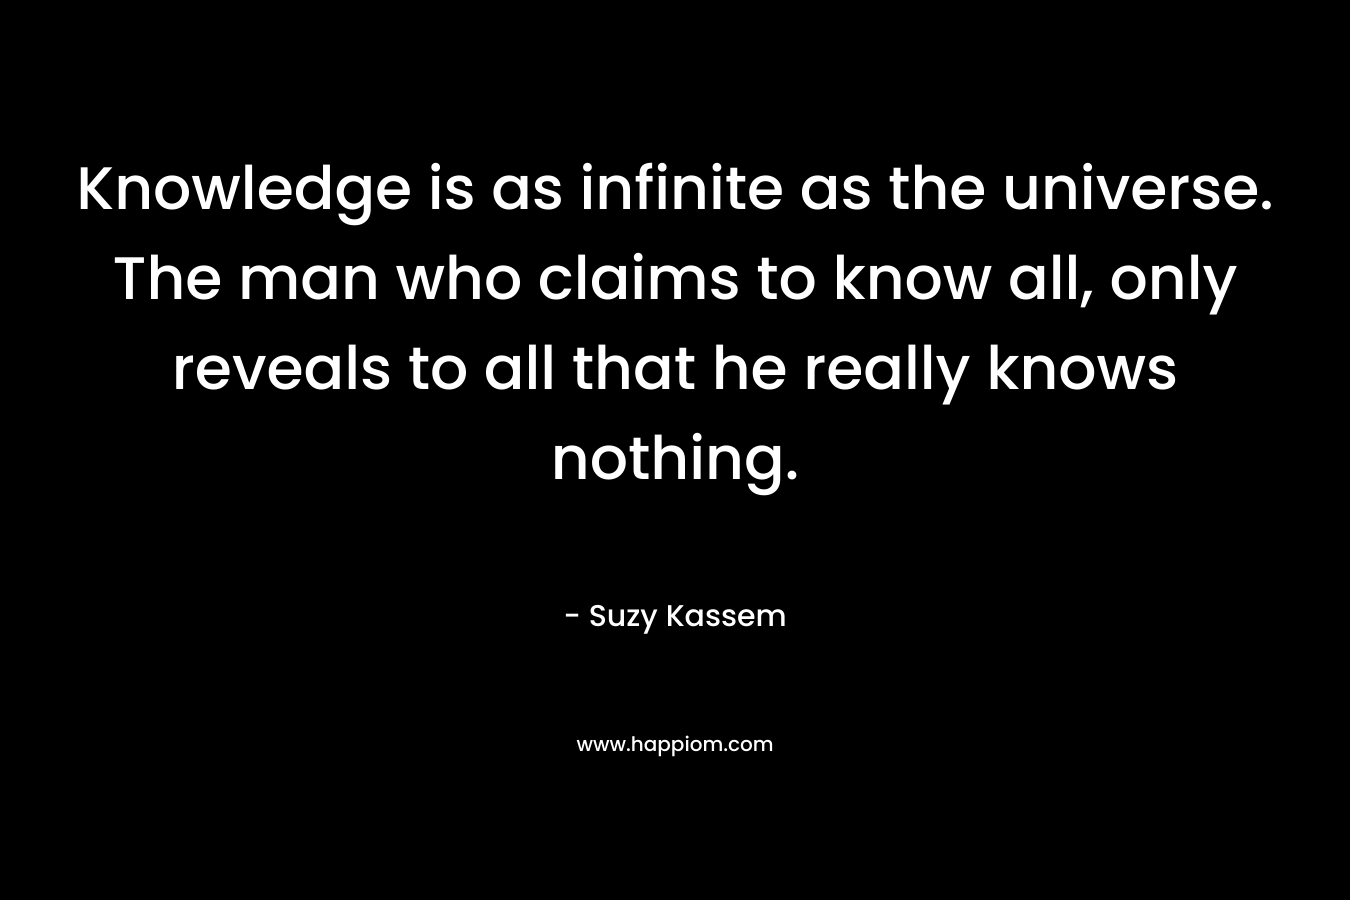 Knowledge is as infinite as the universe. The man who claims to know all, only reveals to all that he really knows nothing.